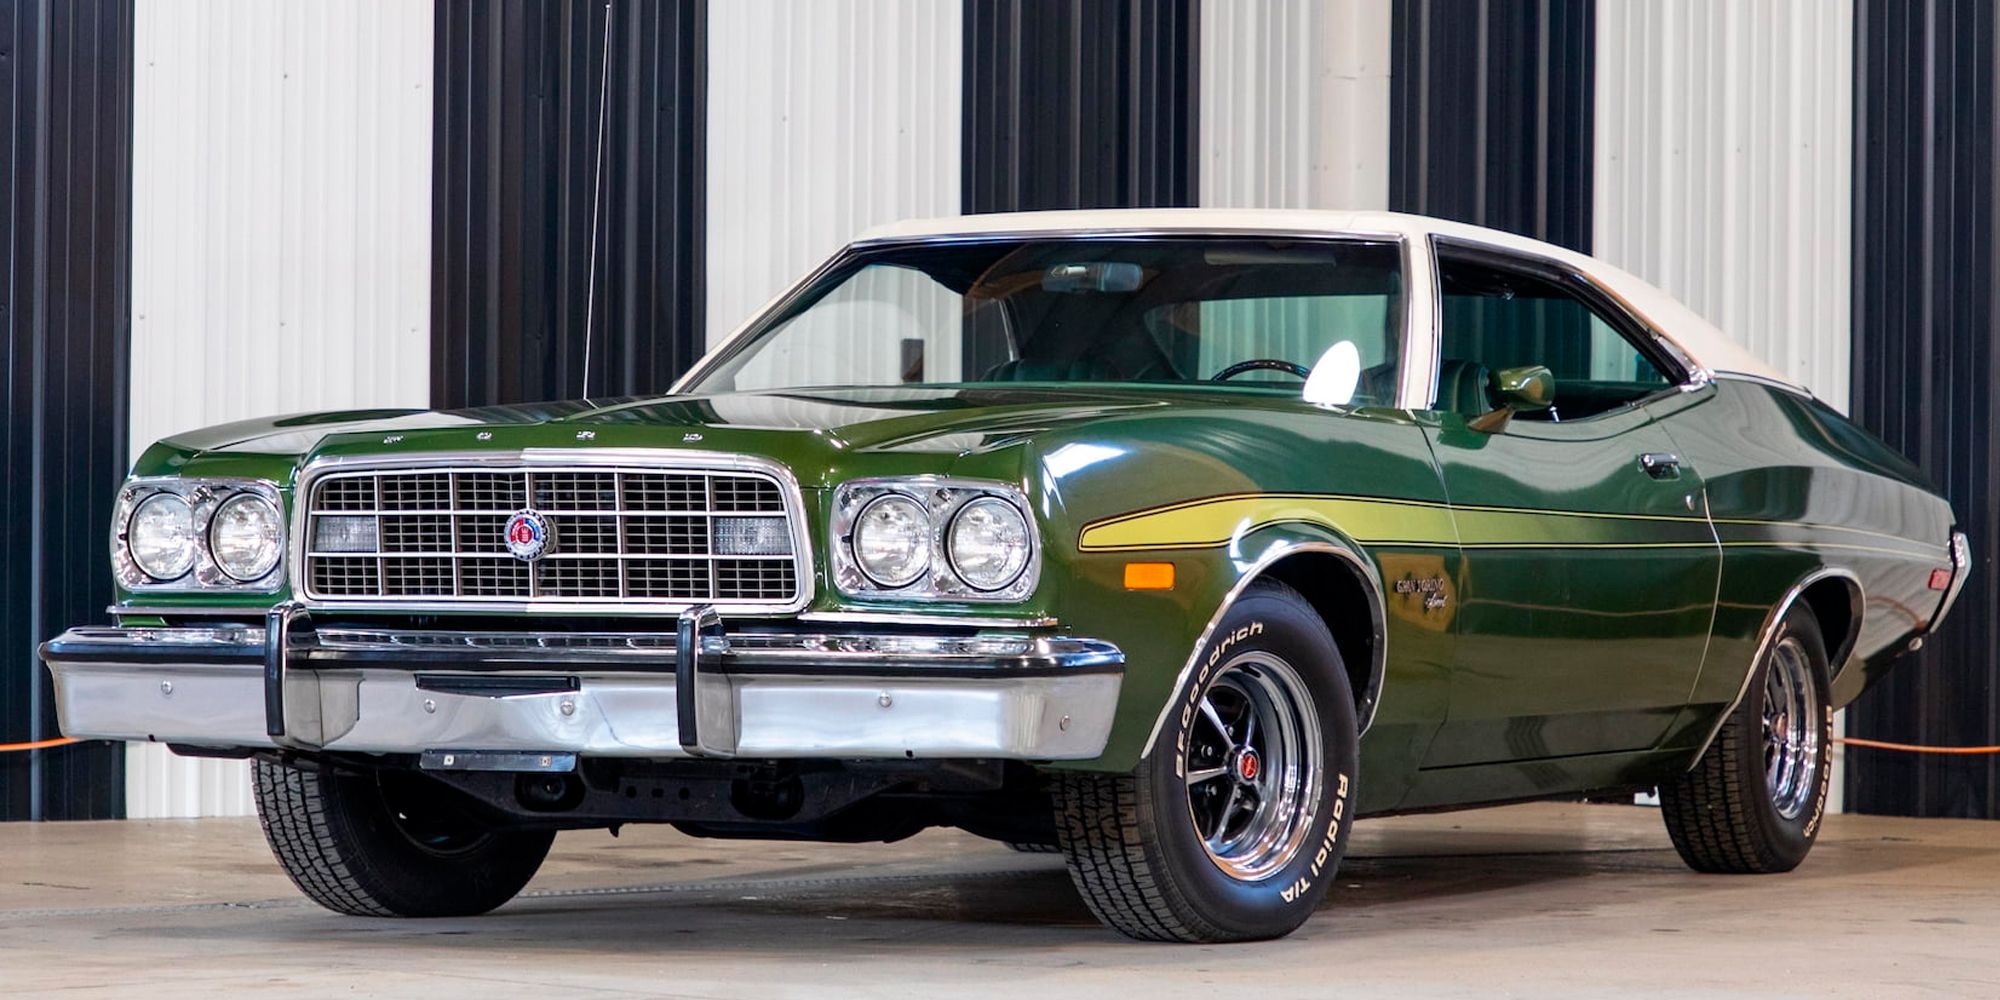 Front 3/4 view of a green 1973 Gran Torino